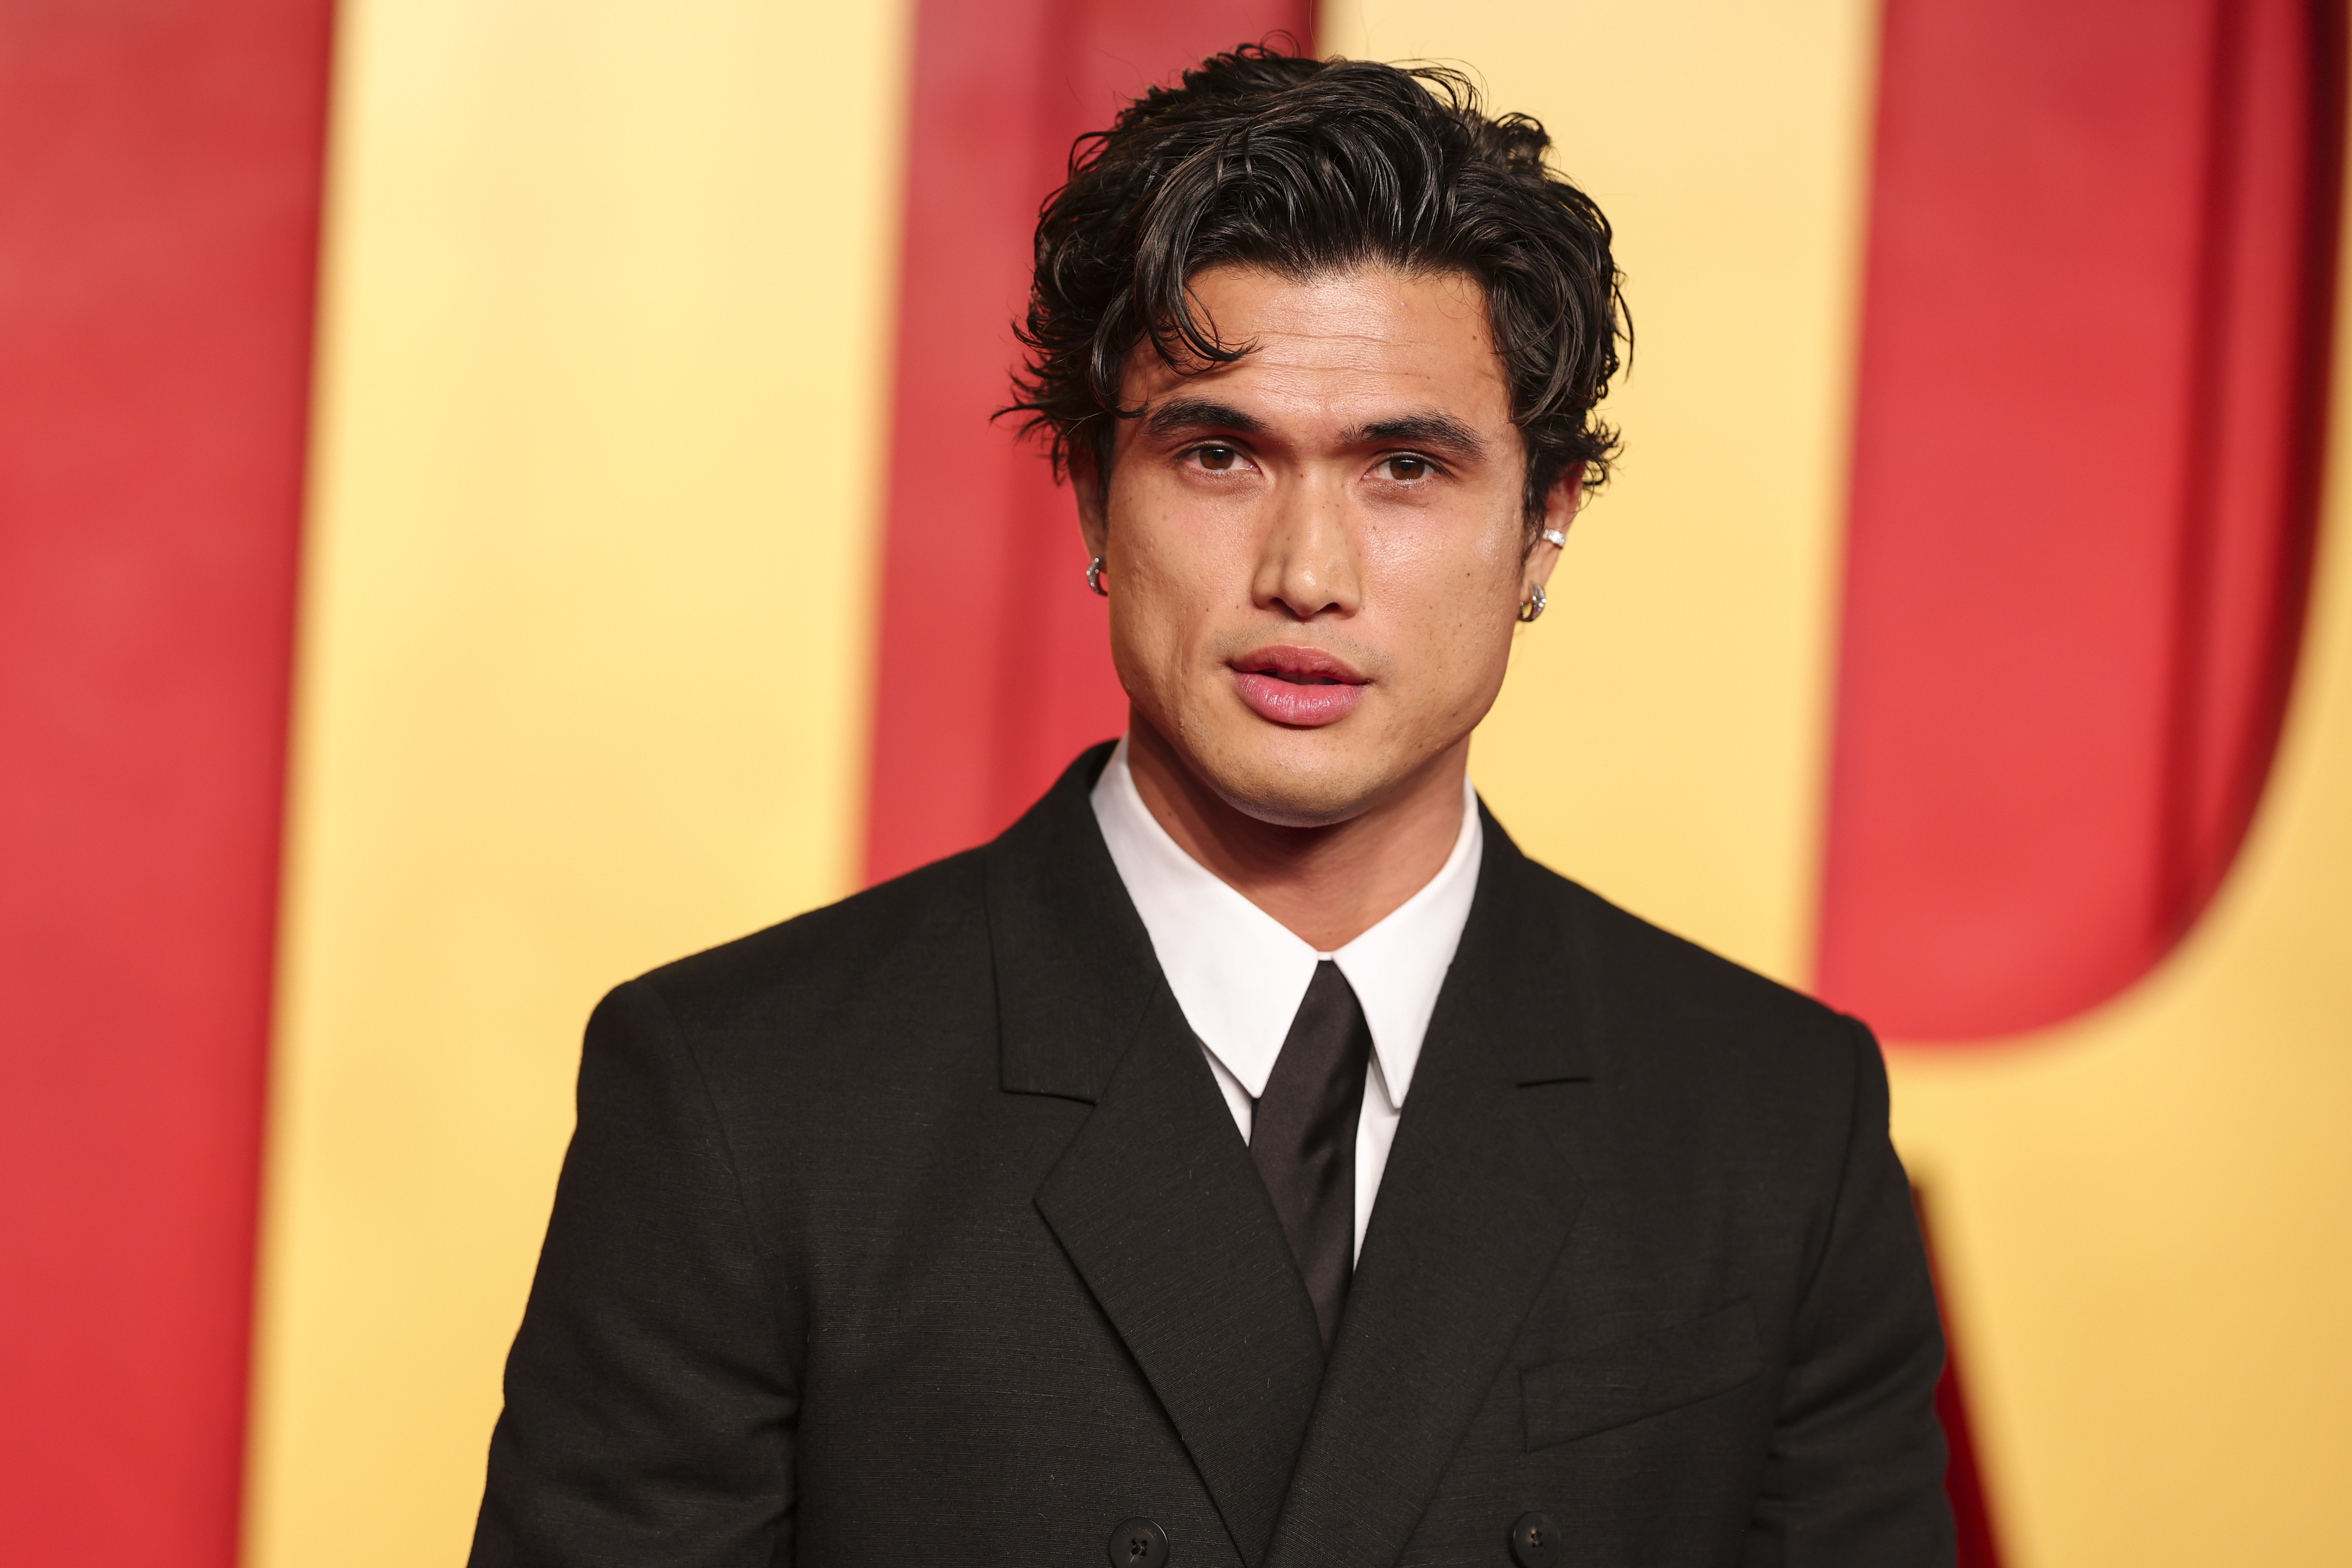 Charles Melton in a suit and tie at a media event